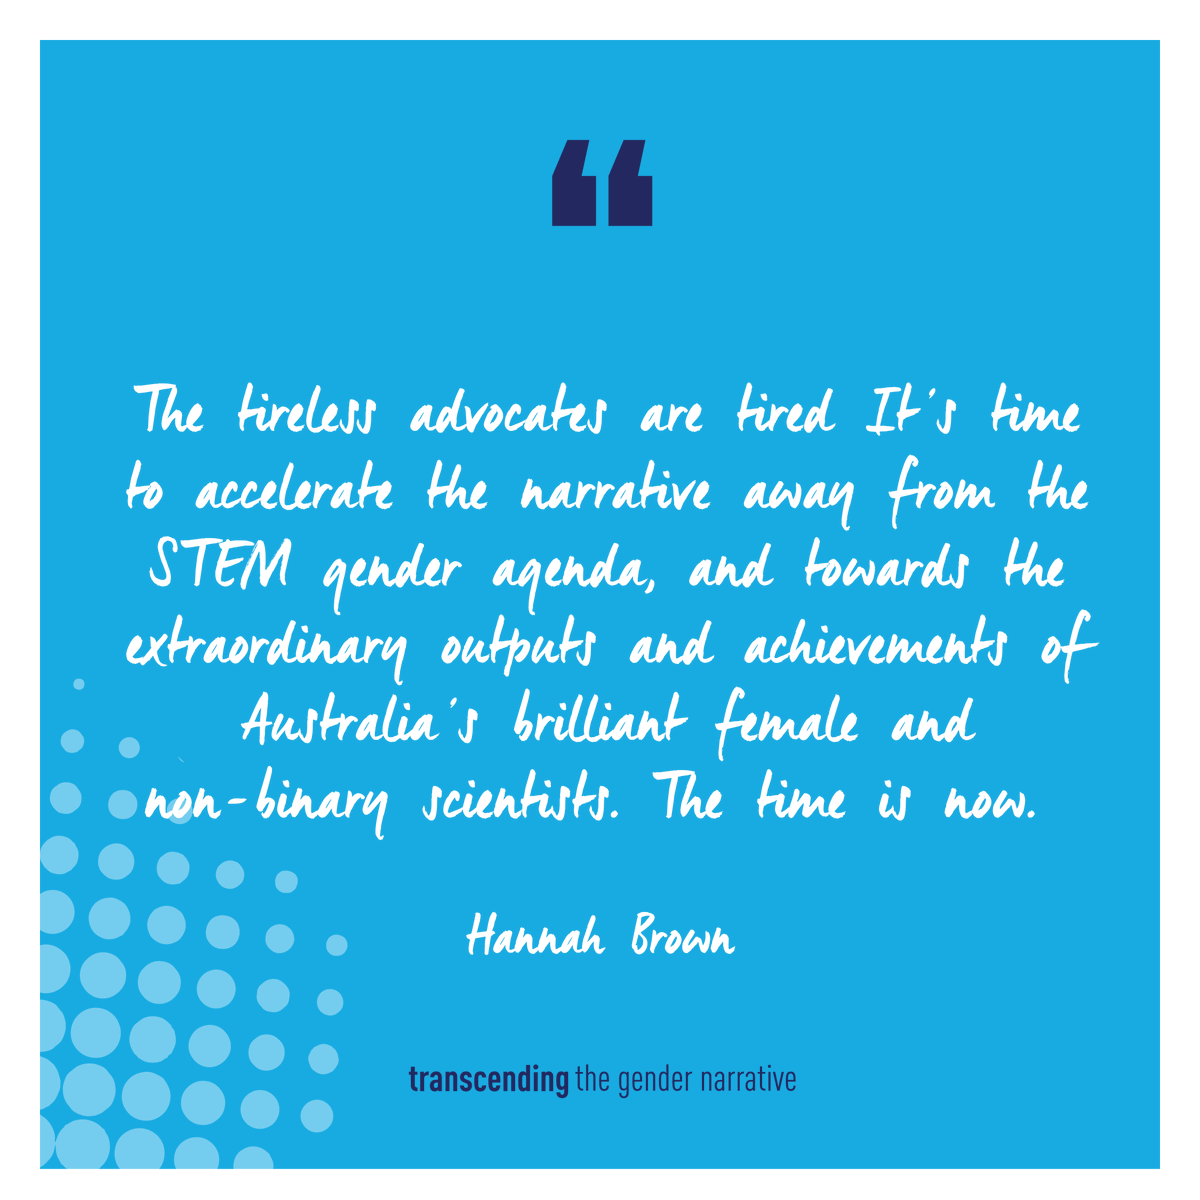 The time is now to help Australia's brilliant female and non-binary scientists! Great quote from Hannah Brown for our upcoming doco!
#transcendingdoco #EachForEqual  #SheBelongs #WomenFastForward #WinningWomen #BetterWorkingWorld
#Womenentrepreneurs #Leadership #Science